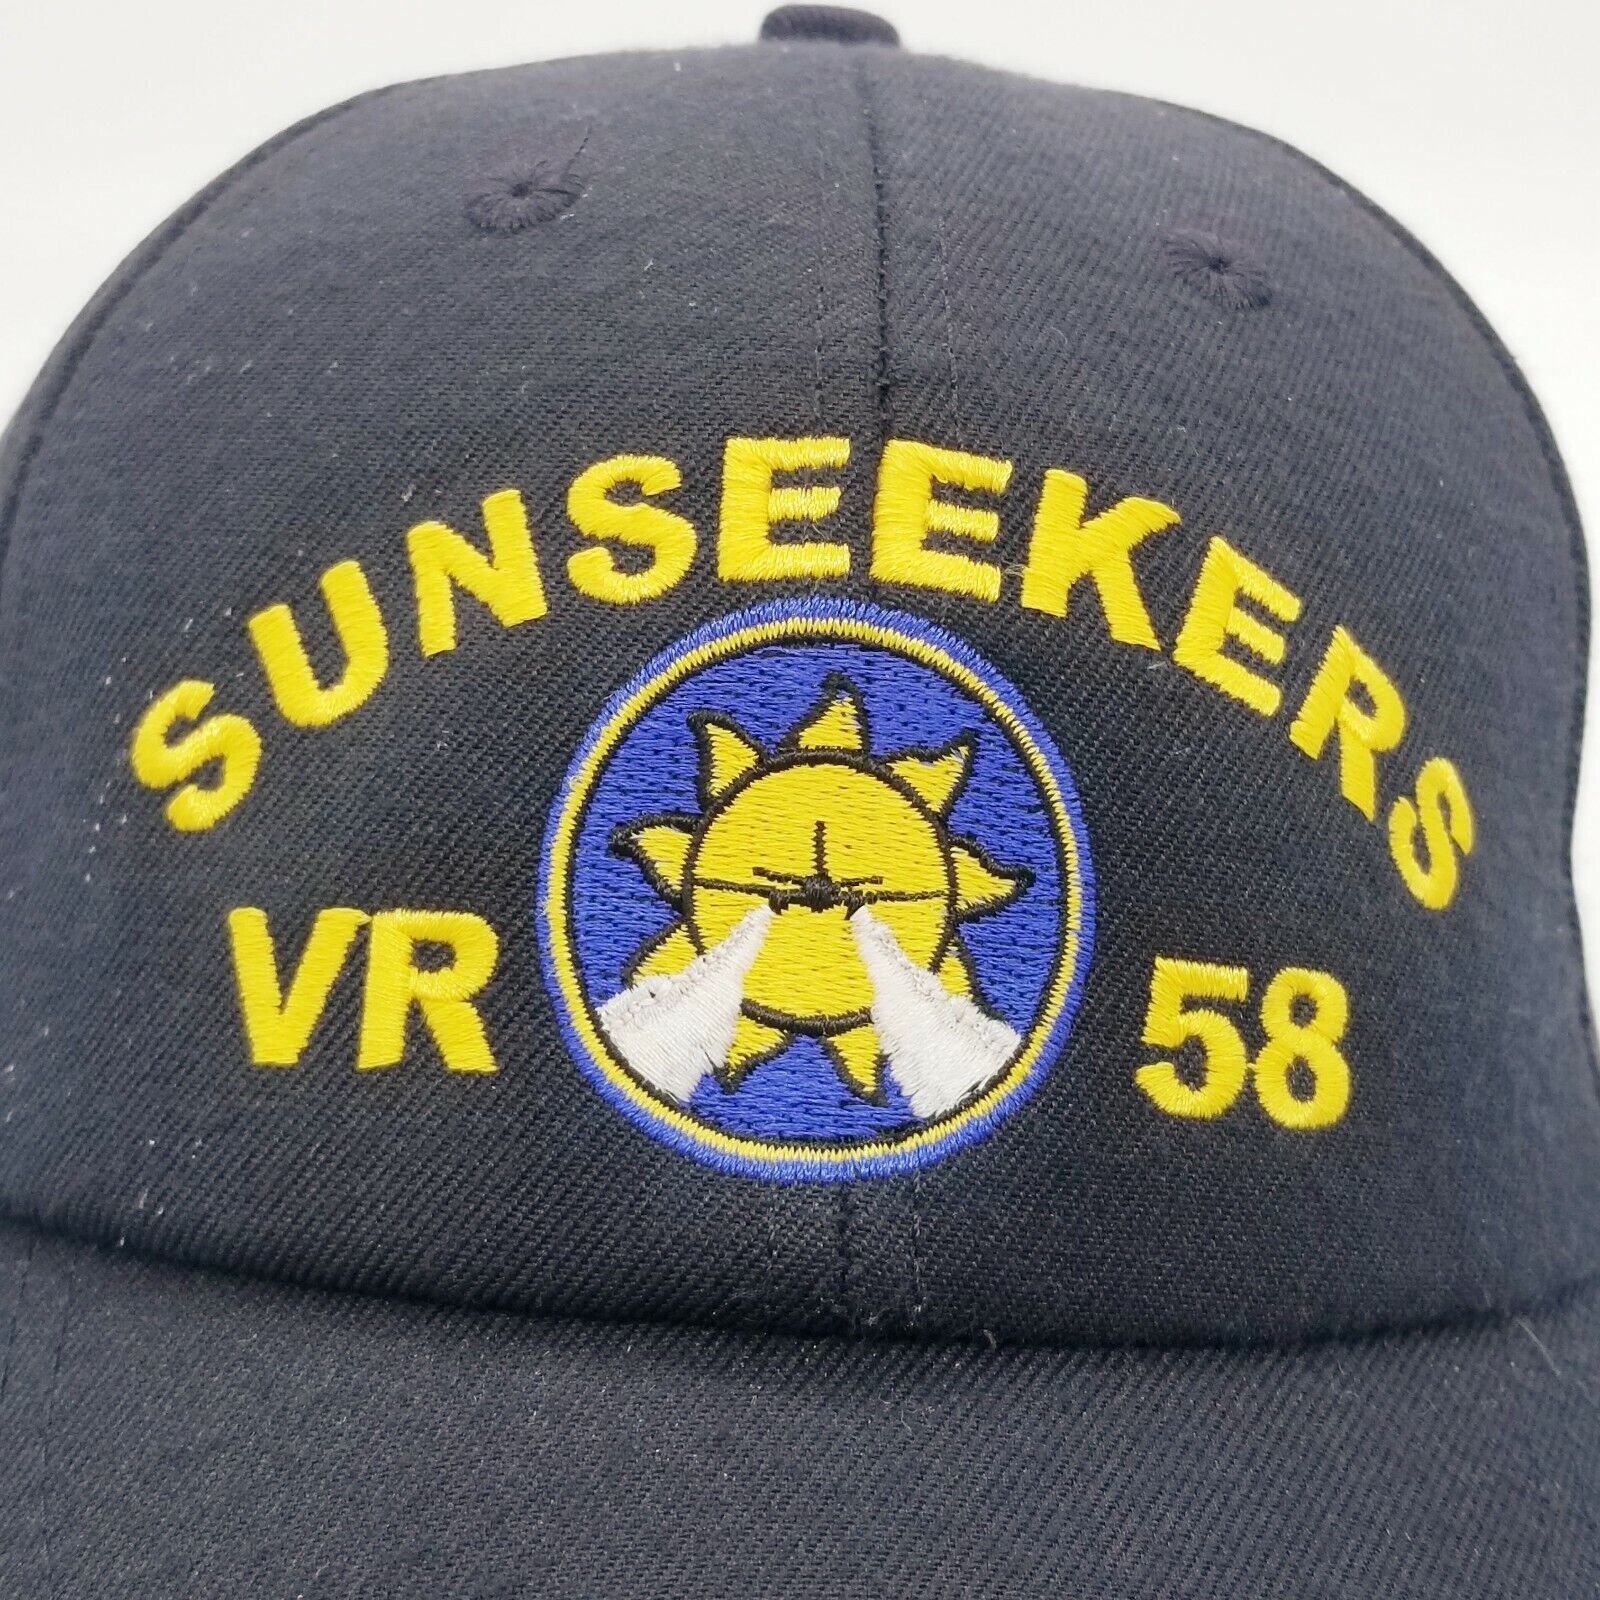 SunSeekers VR58 Squadron Cap Hat USA 🇺🇸 Navy Black Embroidered VR 58 Strap 